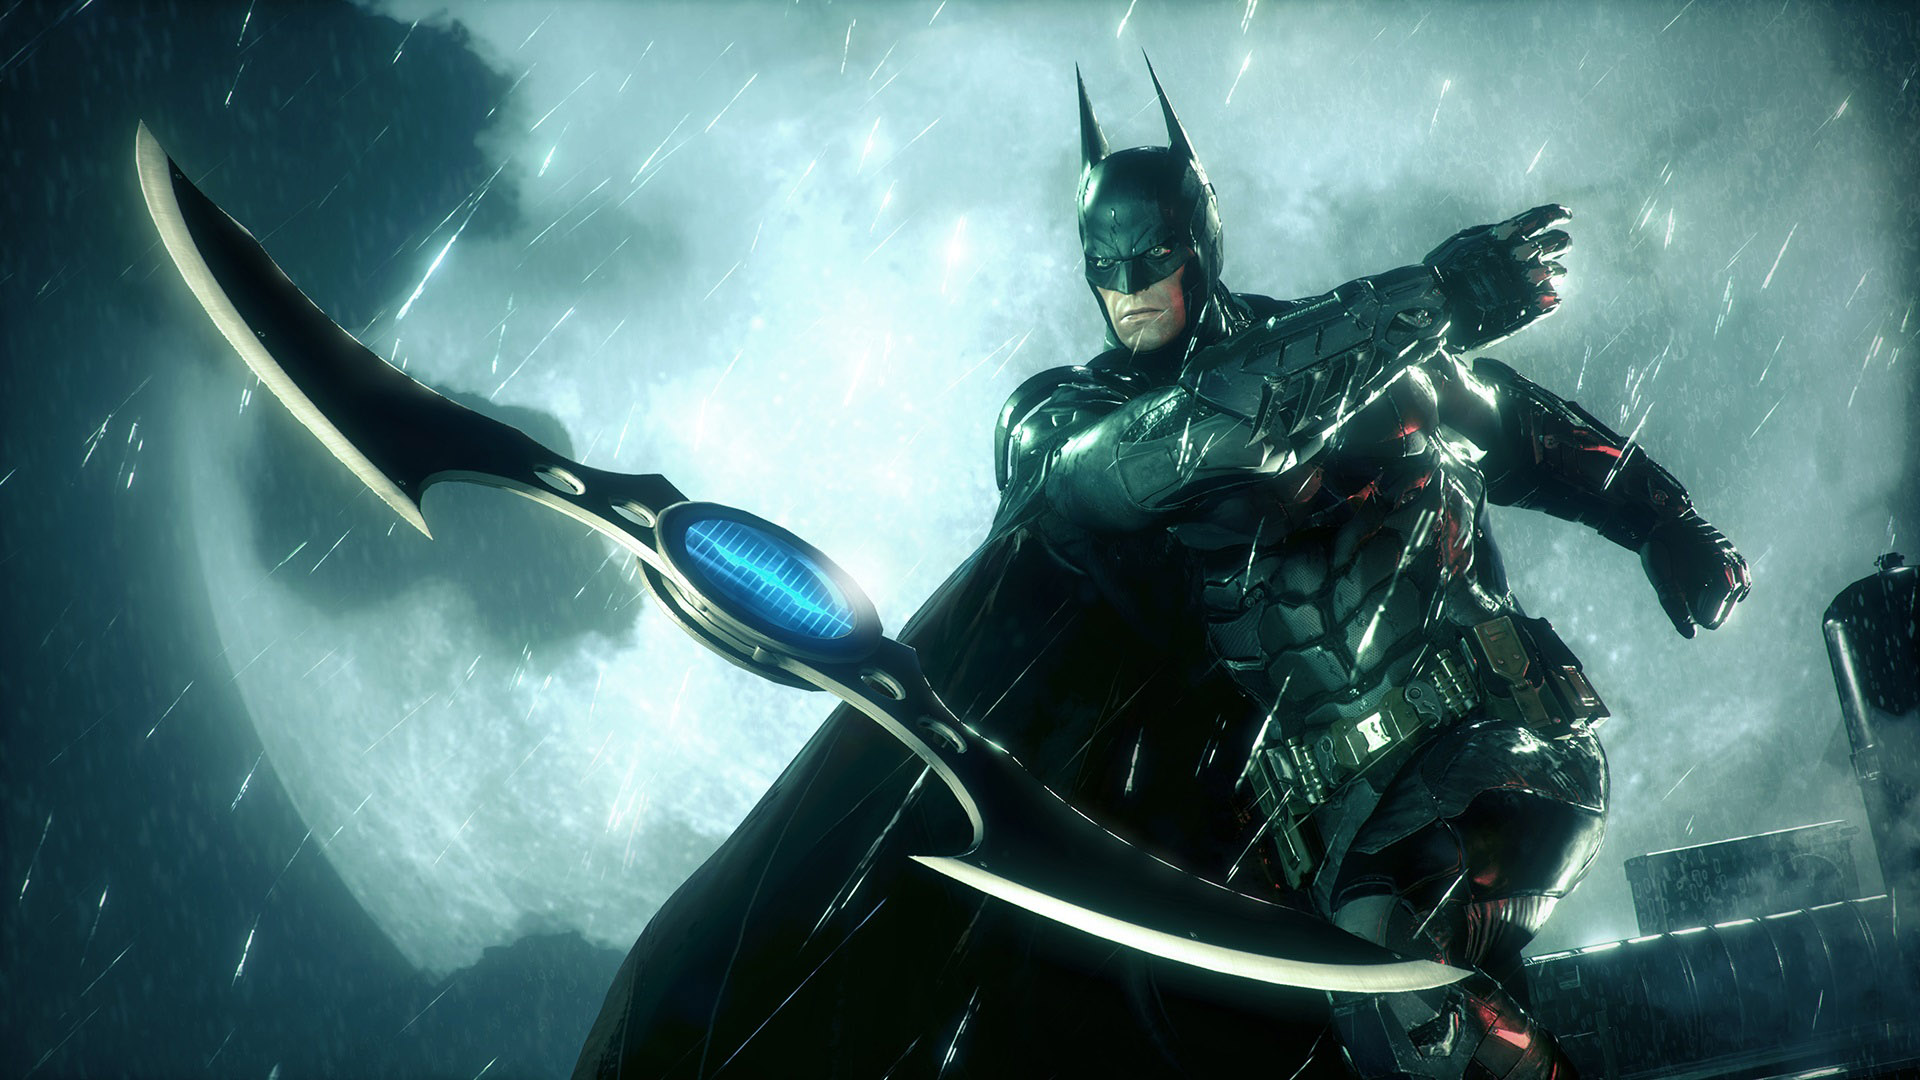 MentaL - Batman: Arkham City - Game of the Year Edition to be won! - RaGEZONE Forums